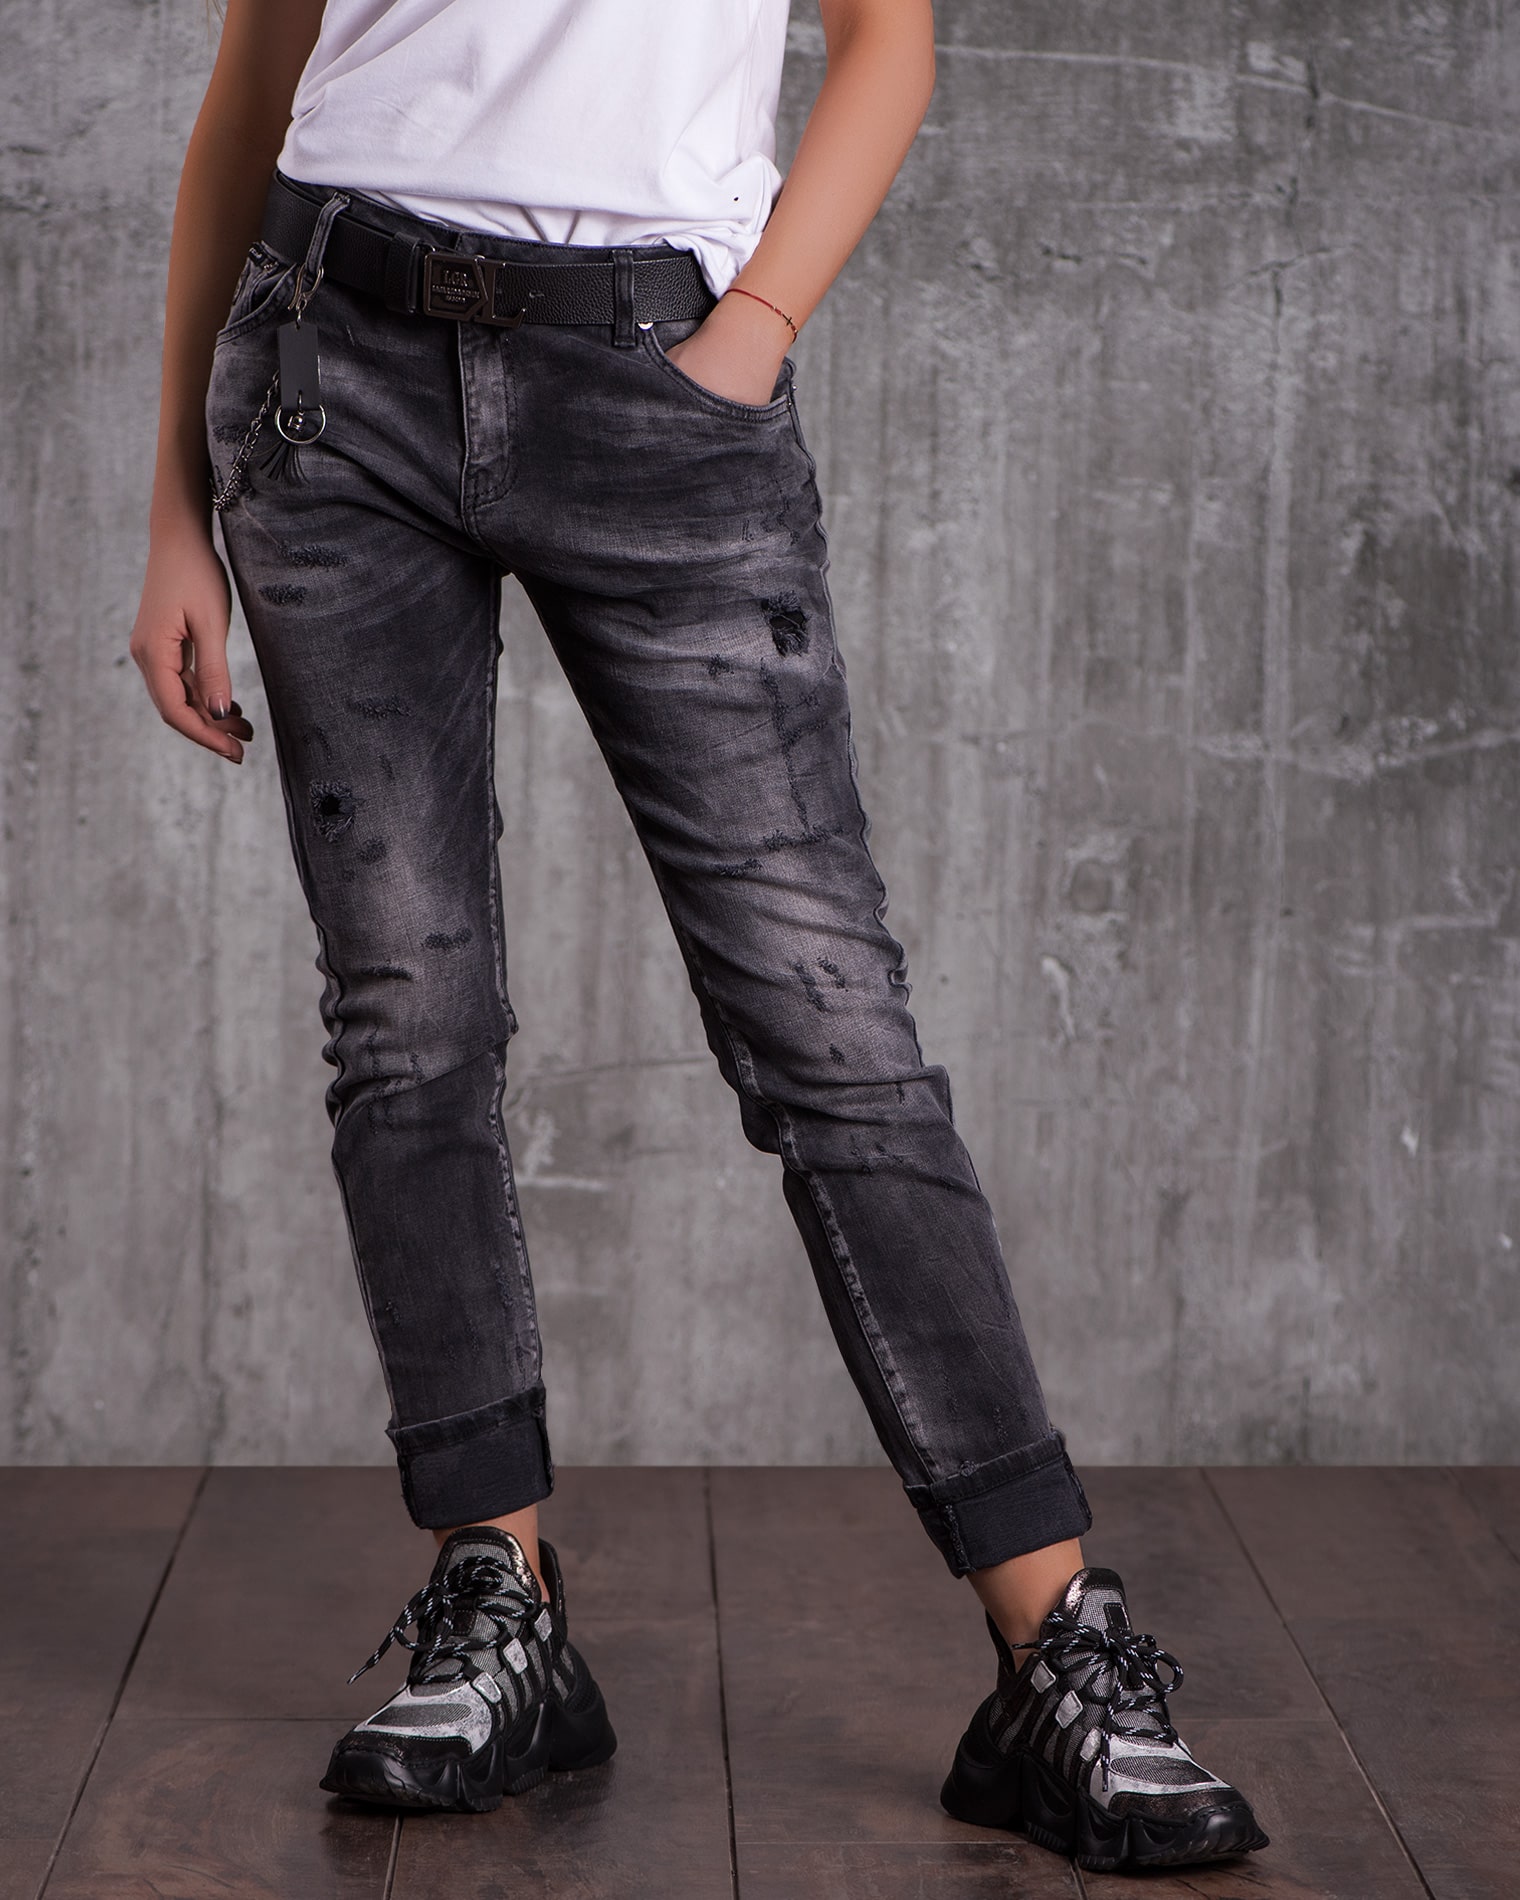 Palazzo Slim-Fit Jeans, Grey Color